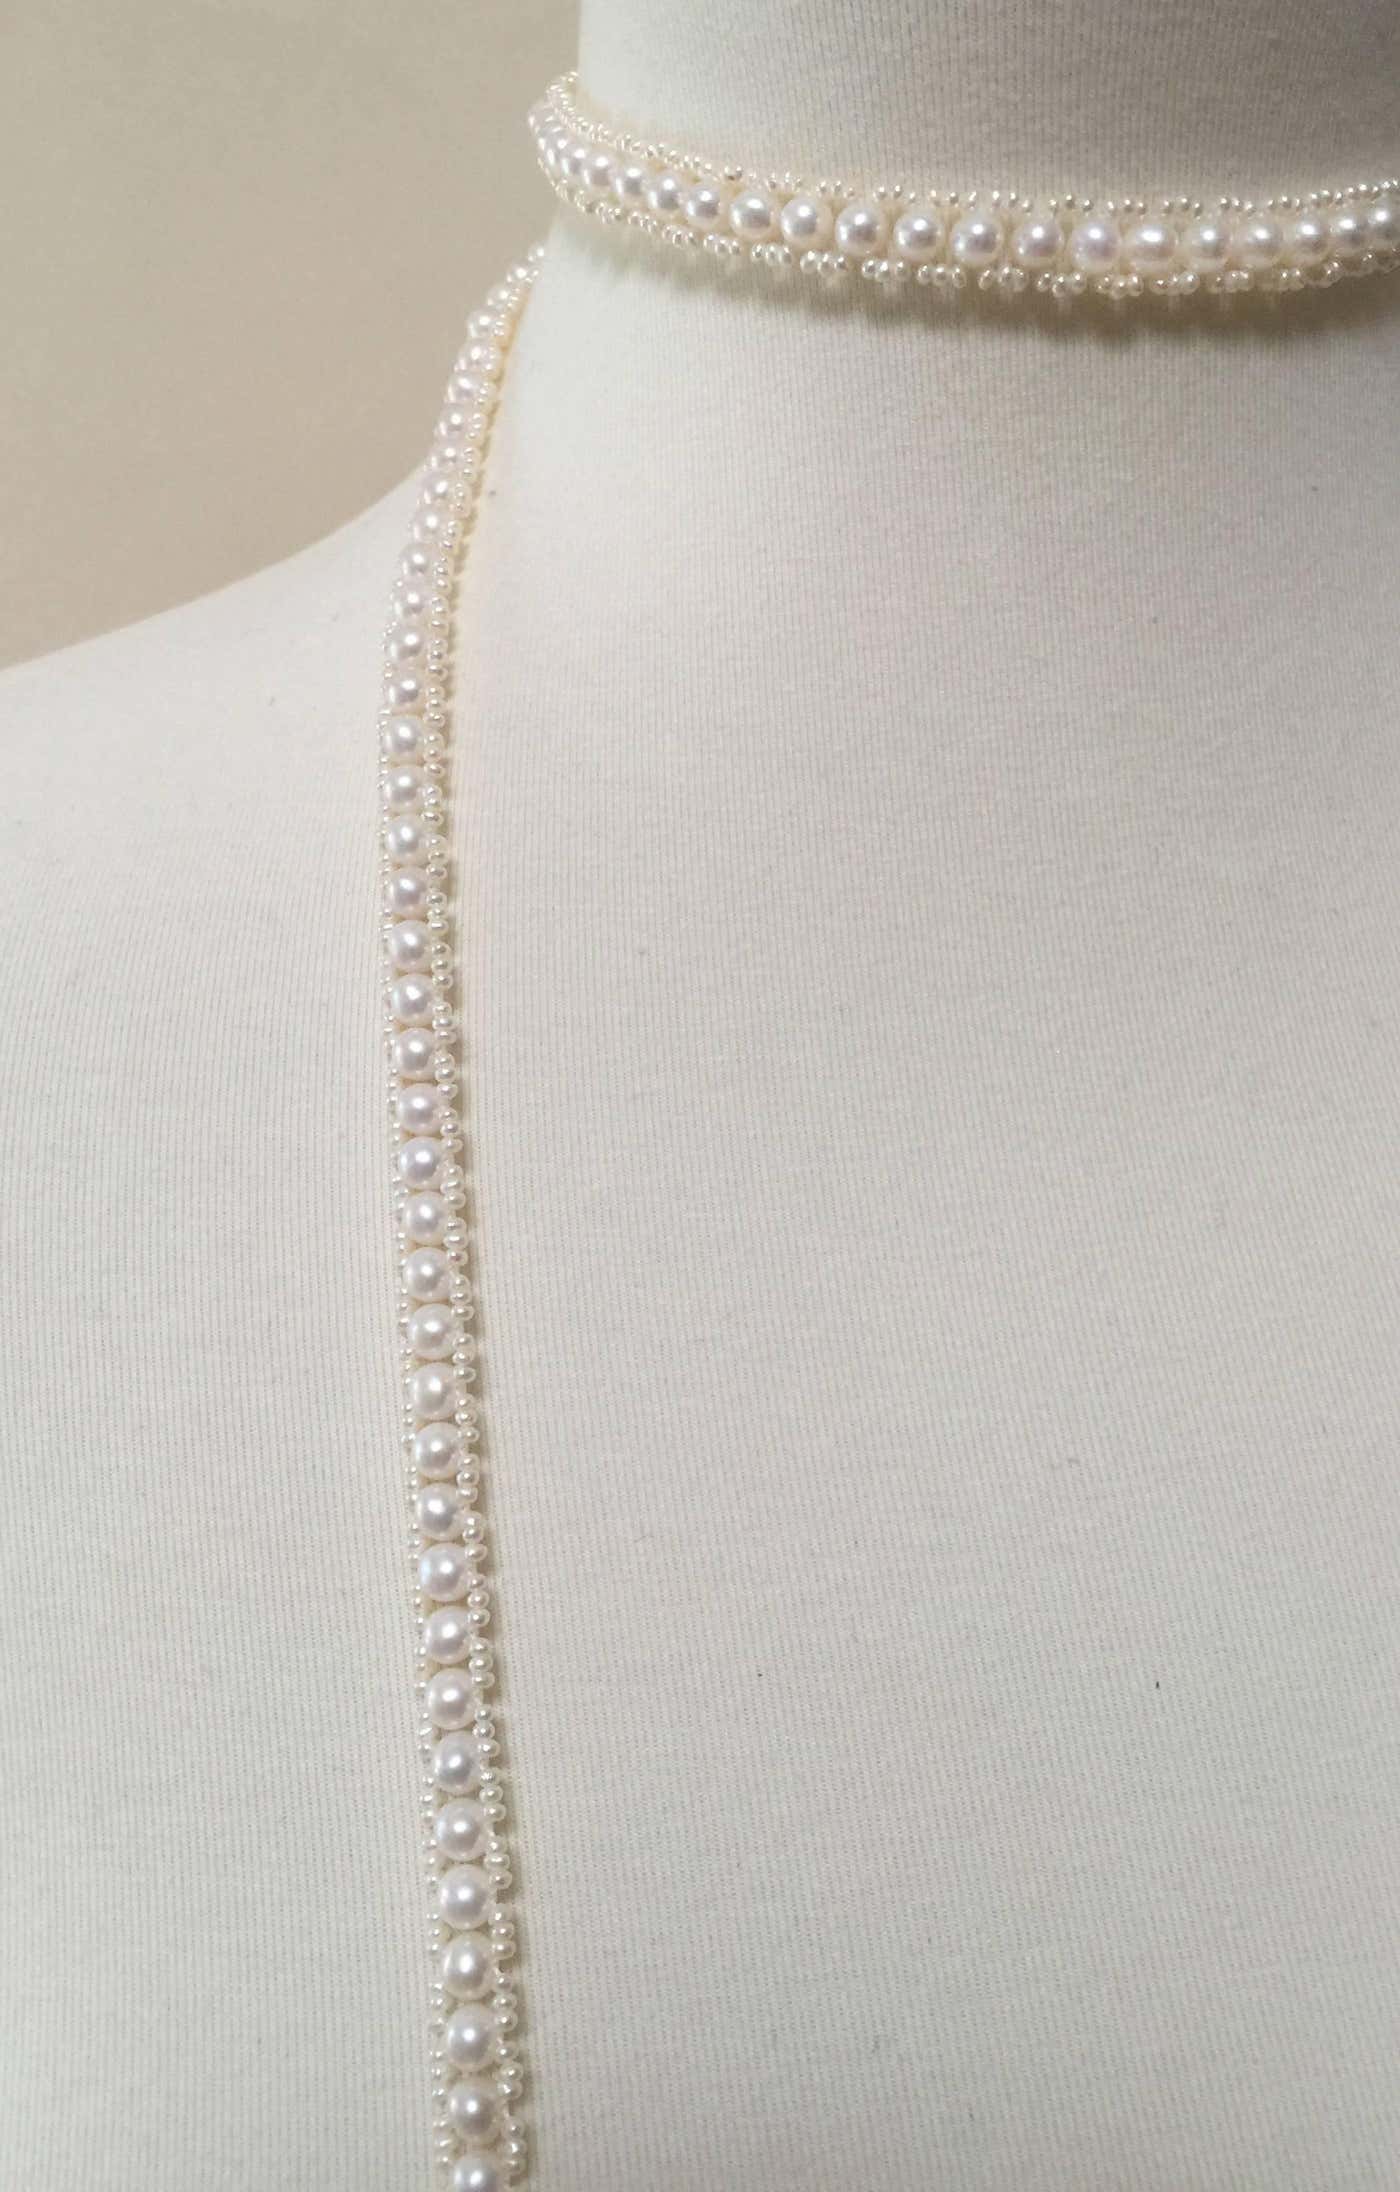 Intricately Woven Pearl Sautoir with Pearl Tassels Diamond roundels